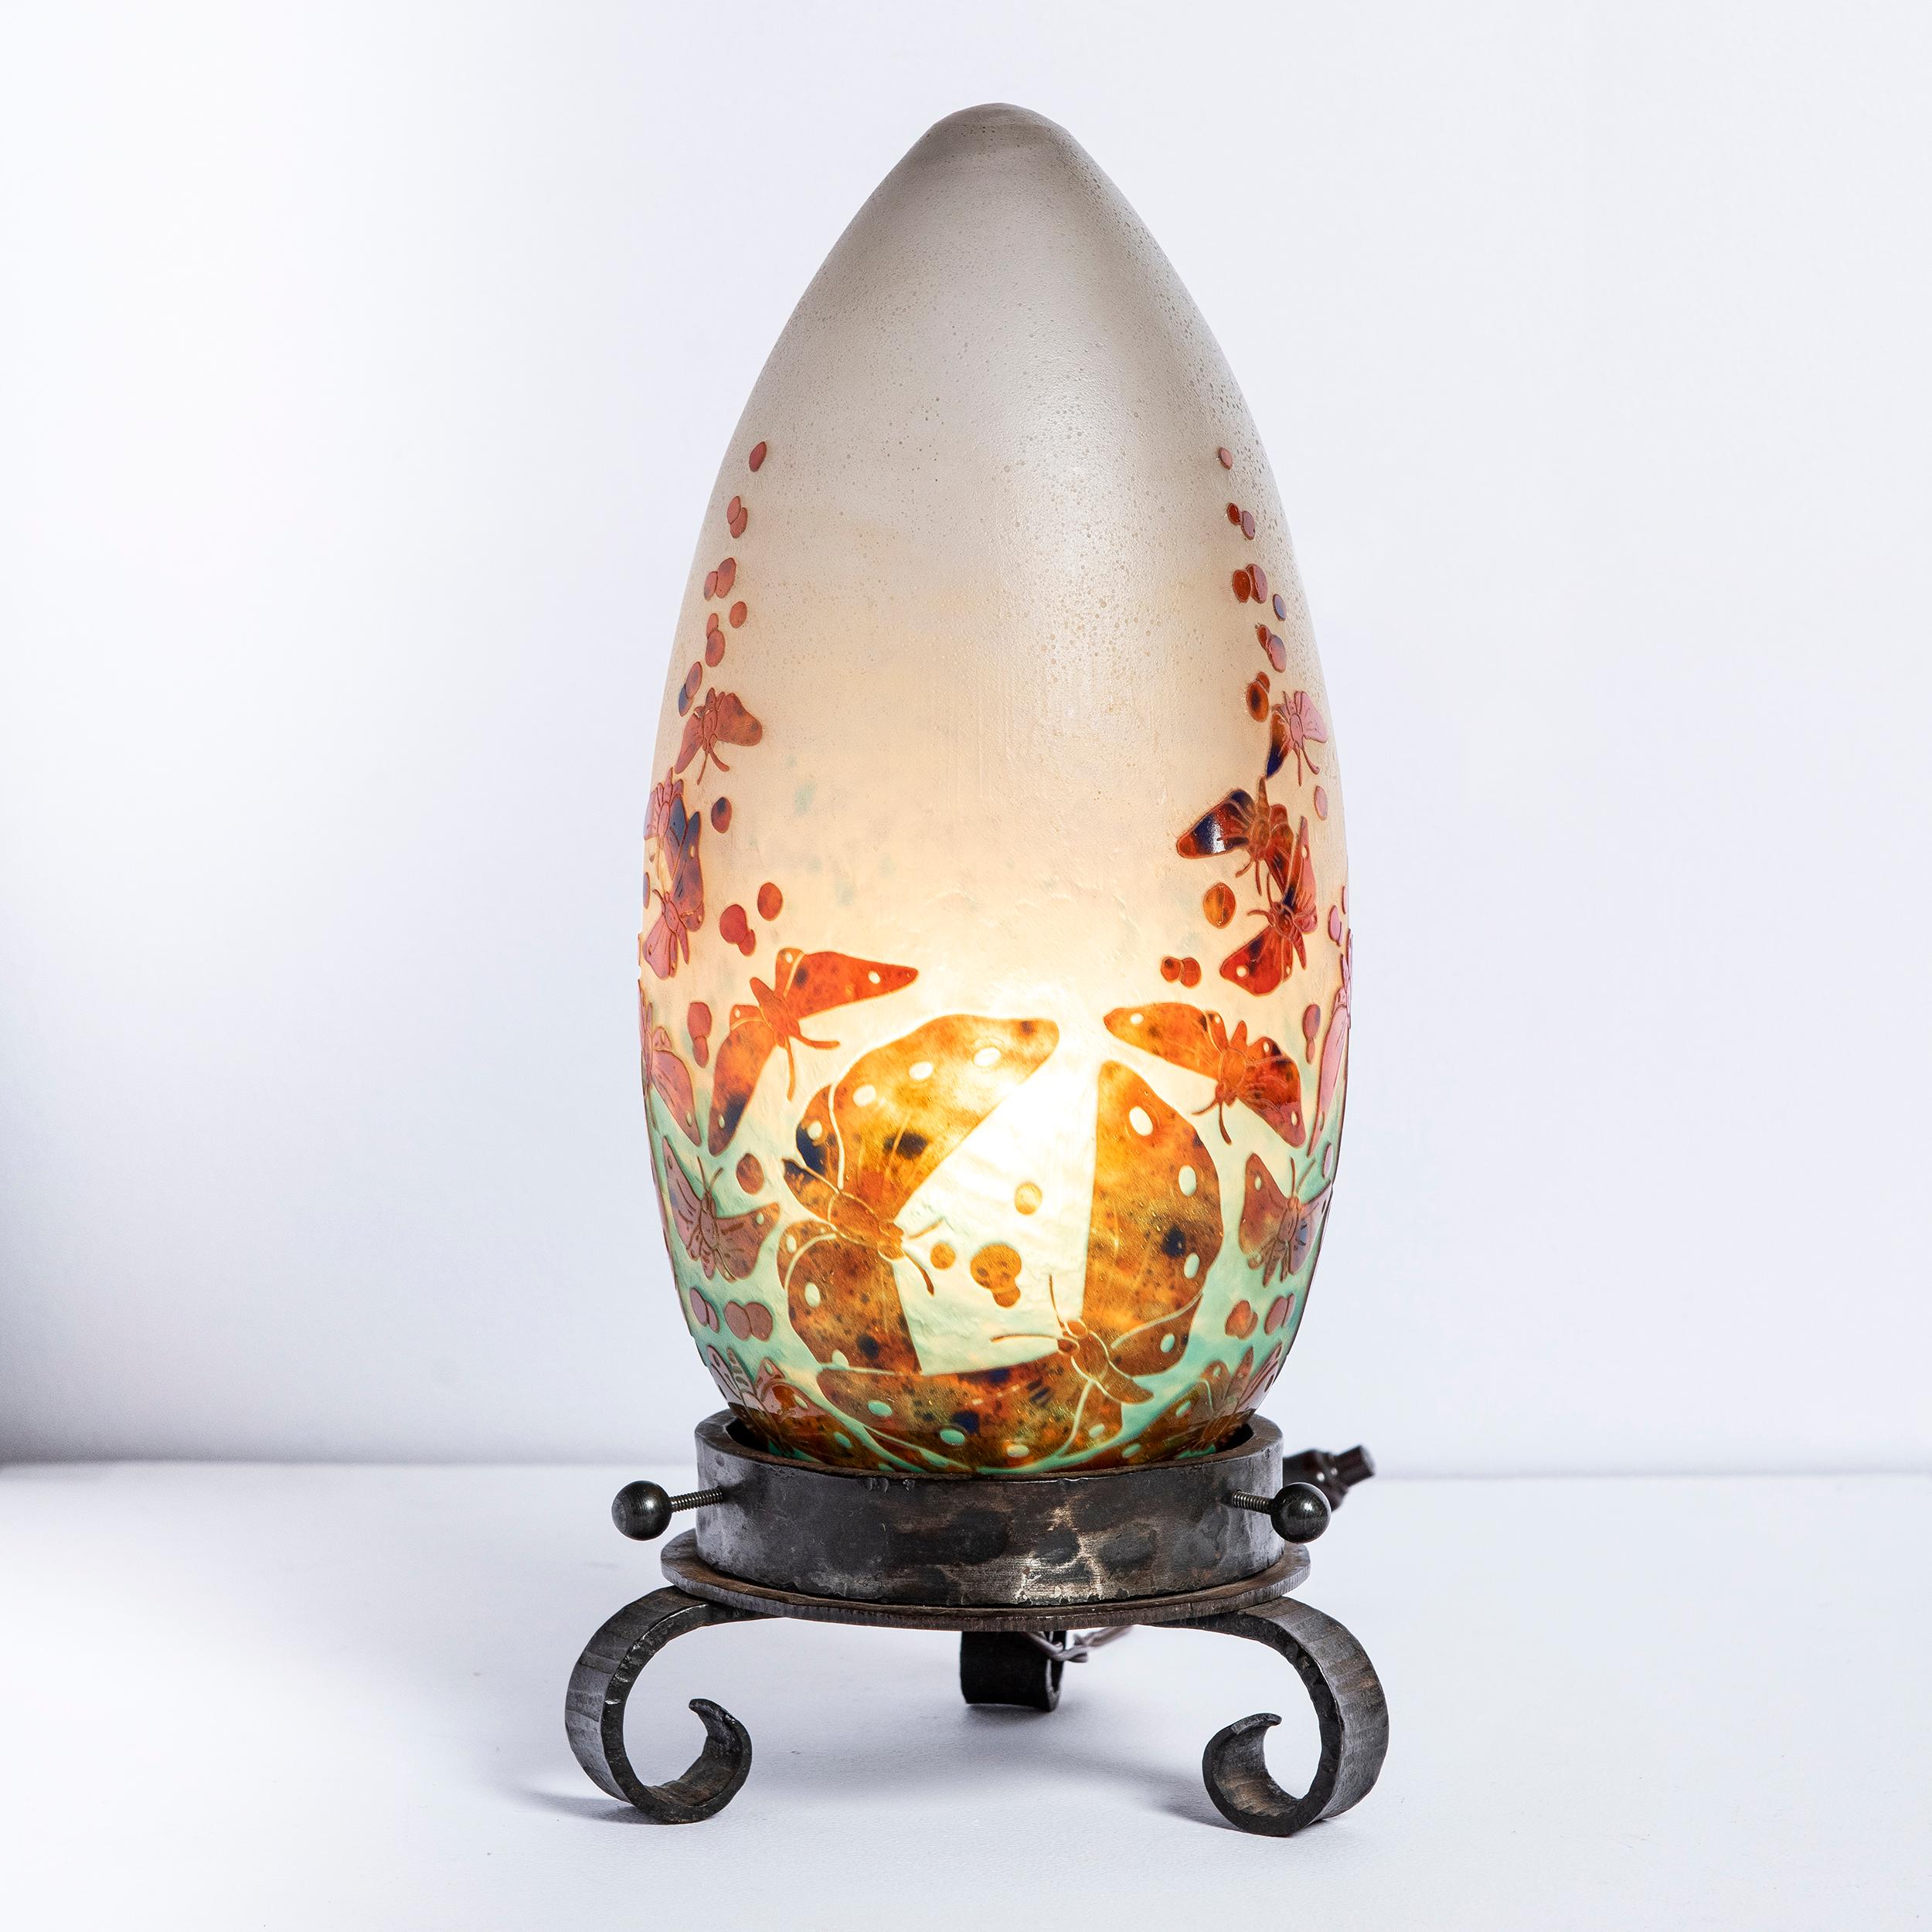 Wrought iron and Le Verre Francais glass table lamp, France, circa 1920-1930.